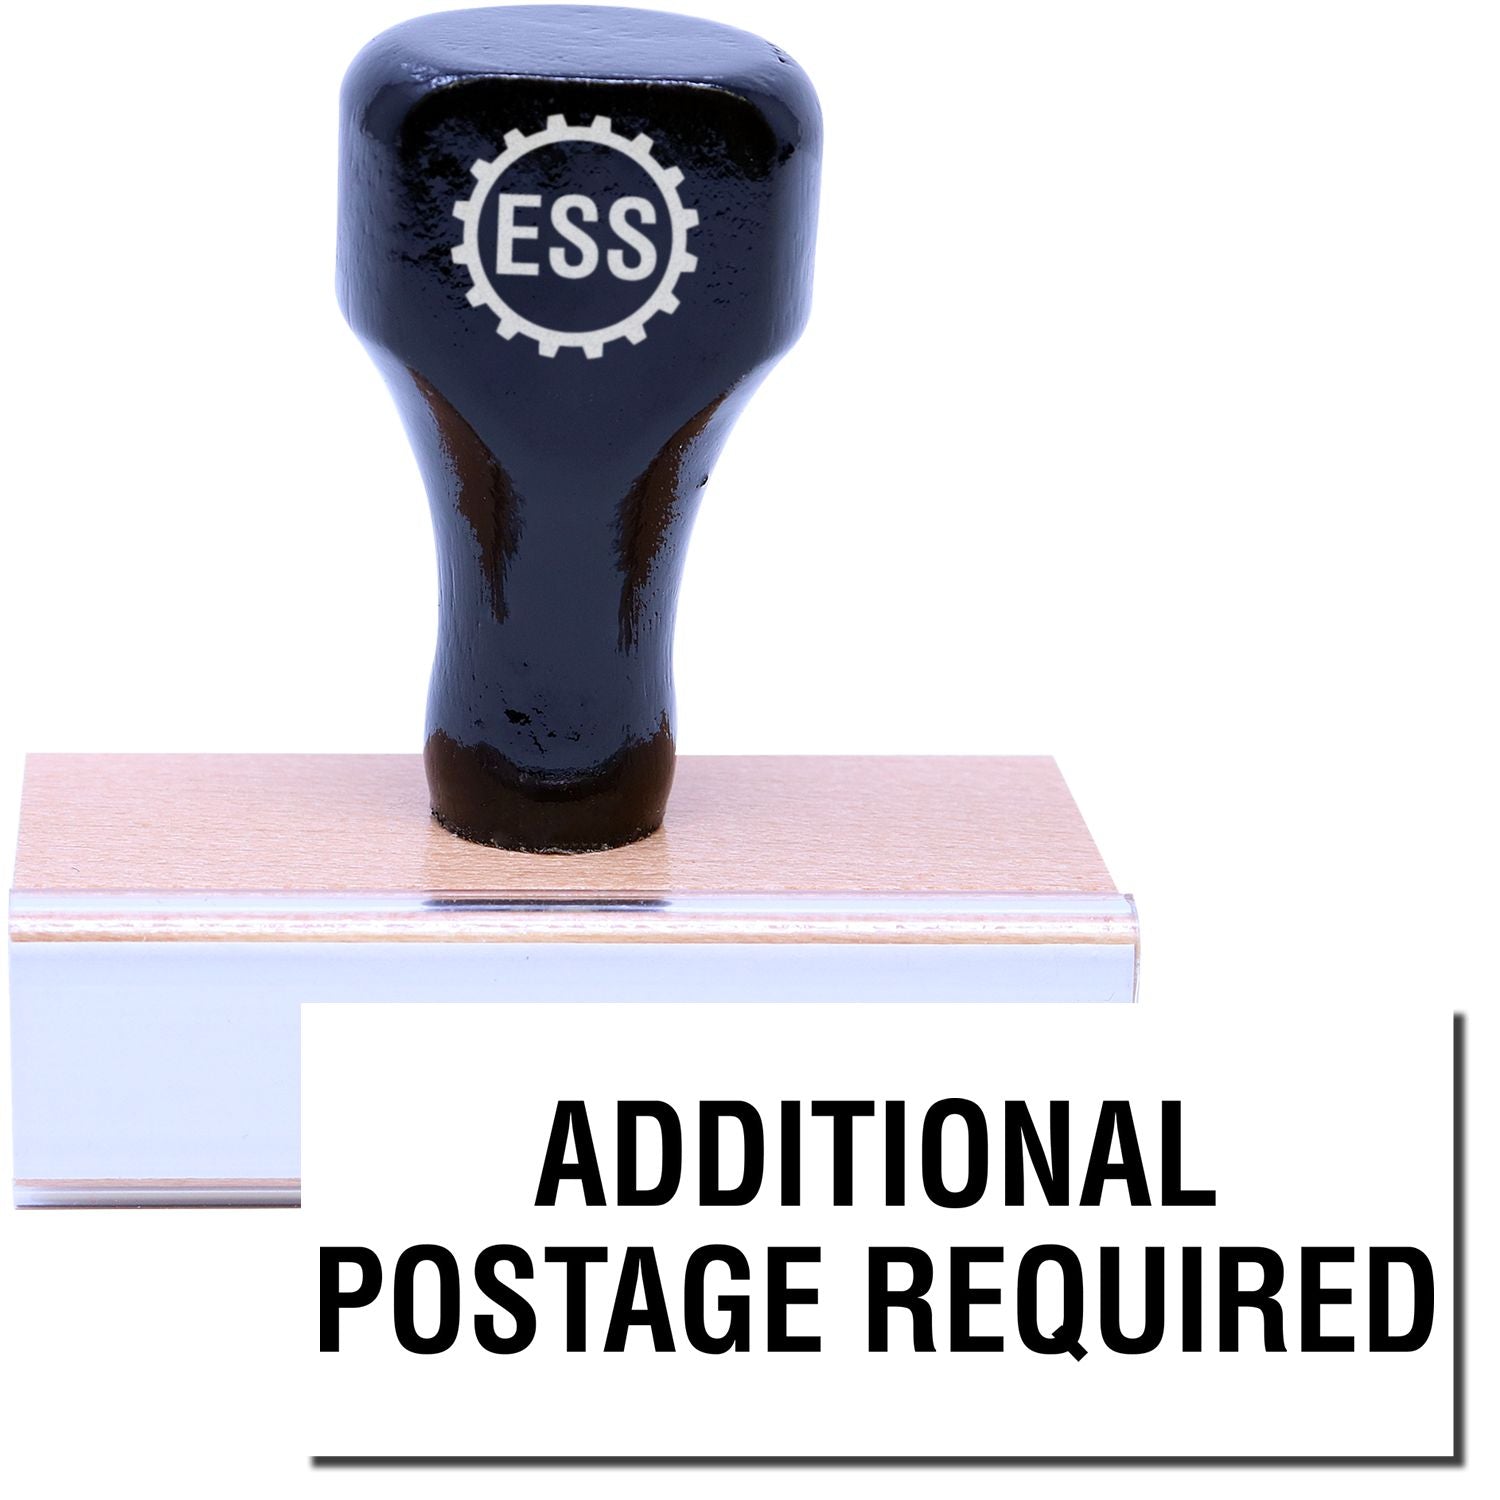 A stock office rubber stamp with a stamped image showing how the text "ADDITIONAL POSTAGE REQUIRED" is displayed after stamping.